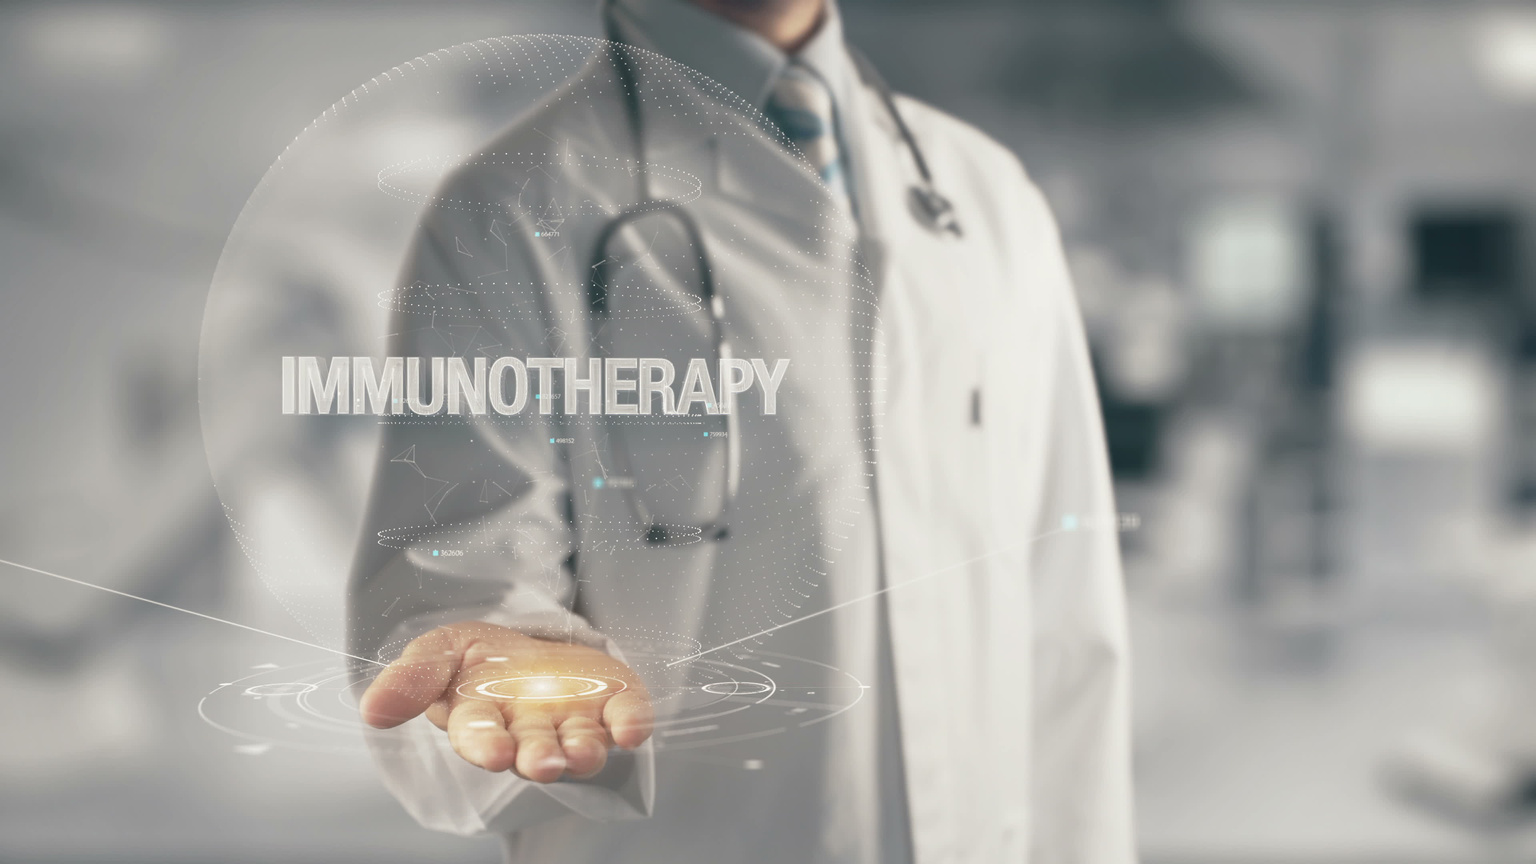 Doctor holding in hand Immunotherapy